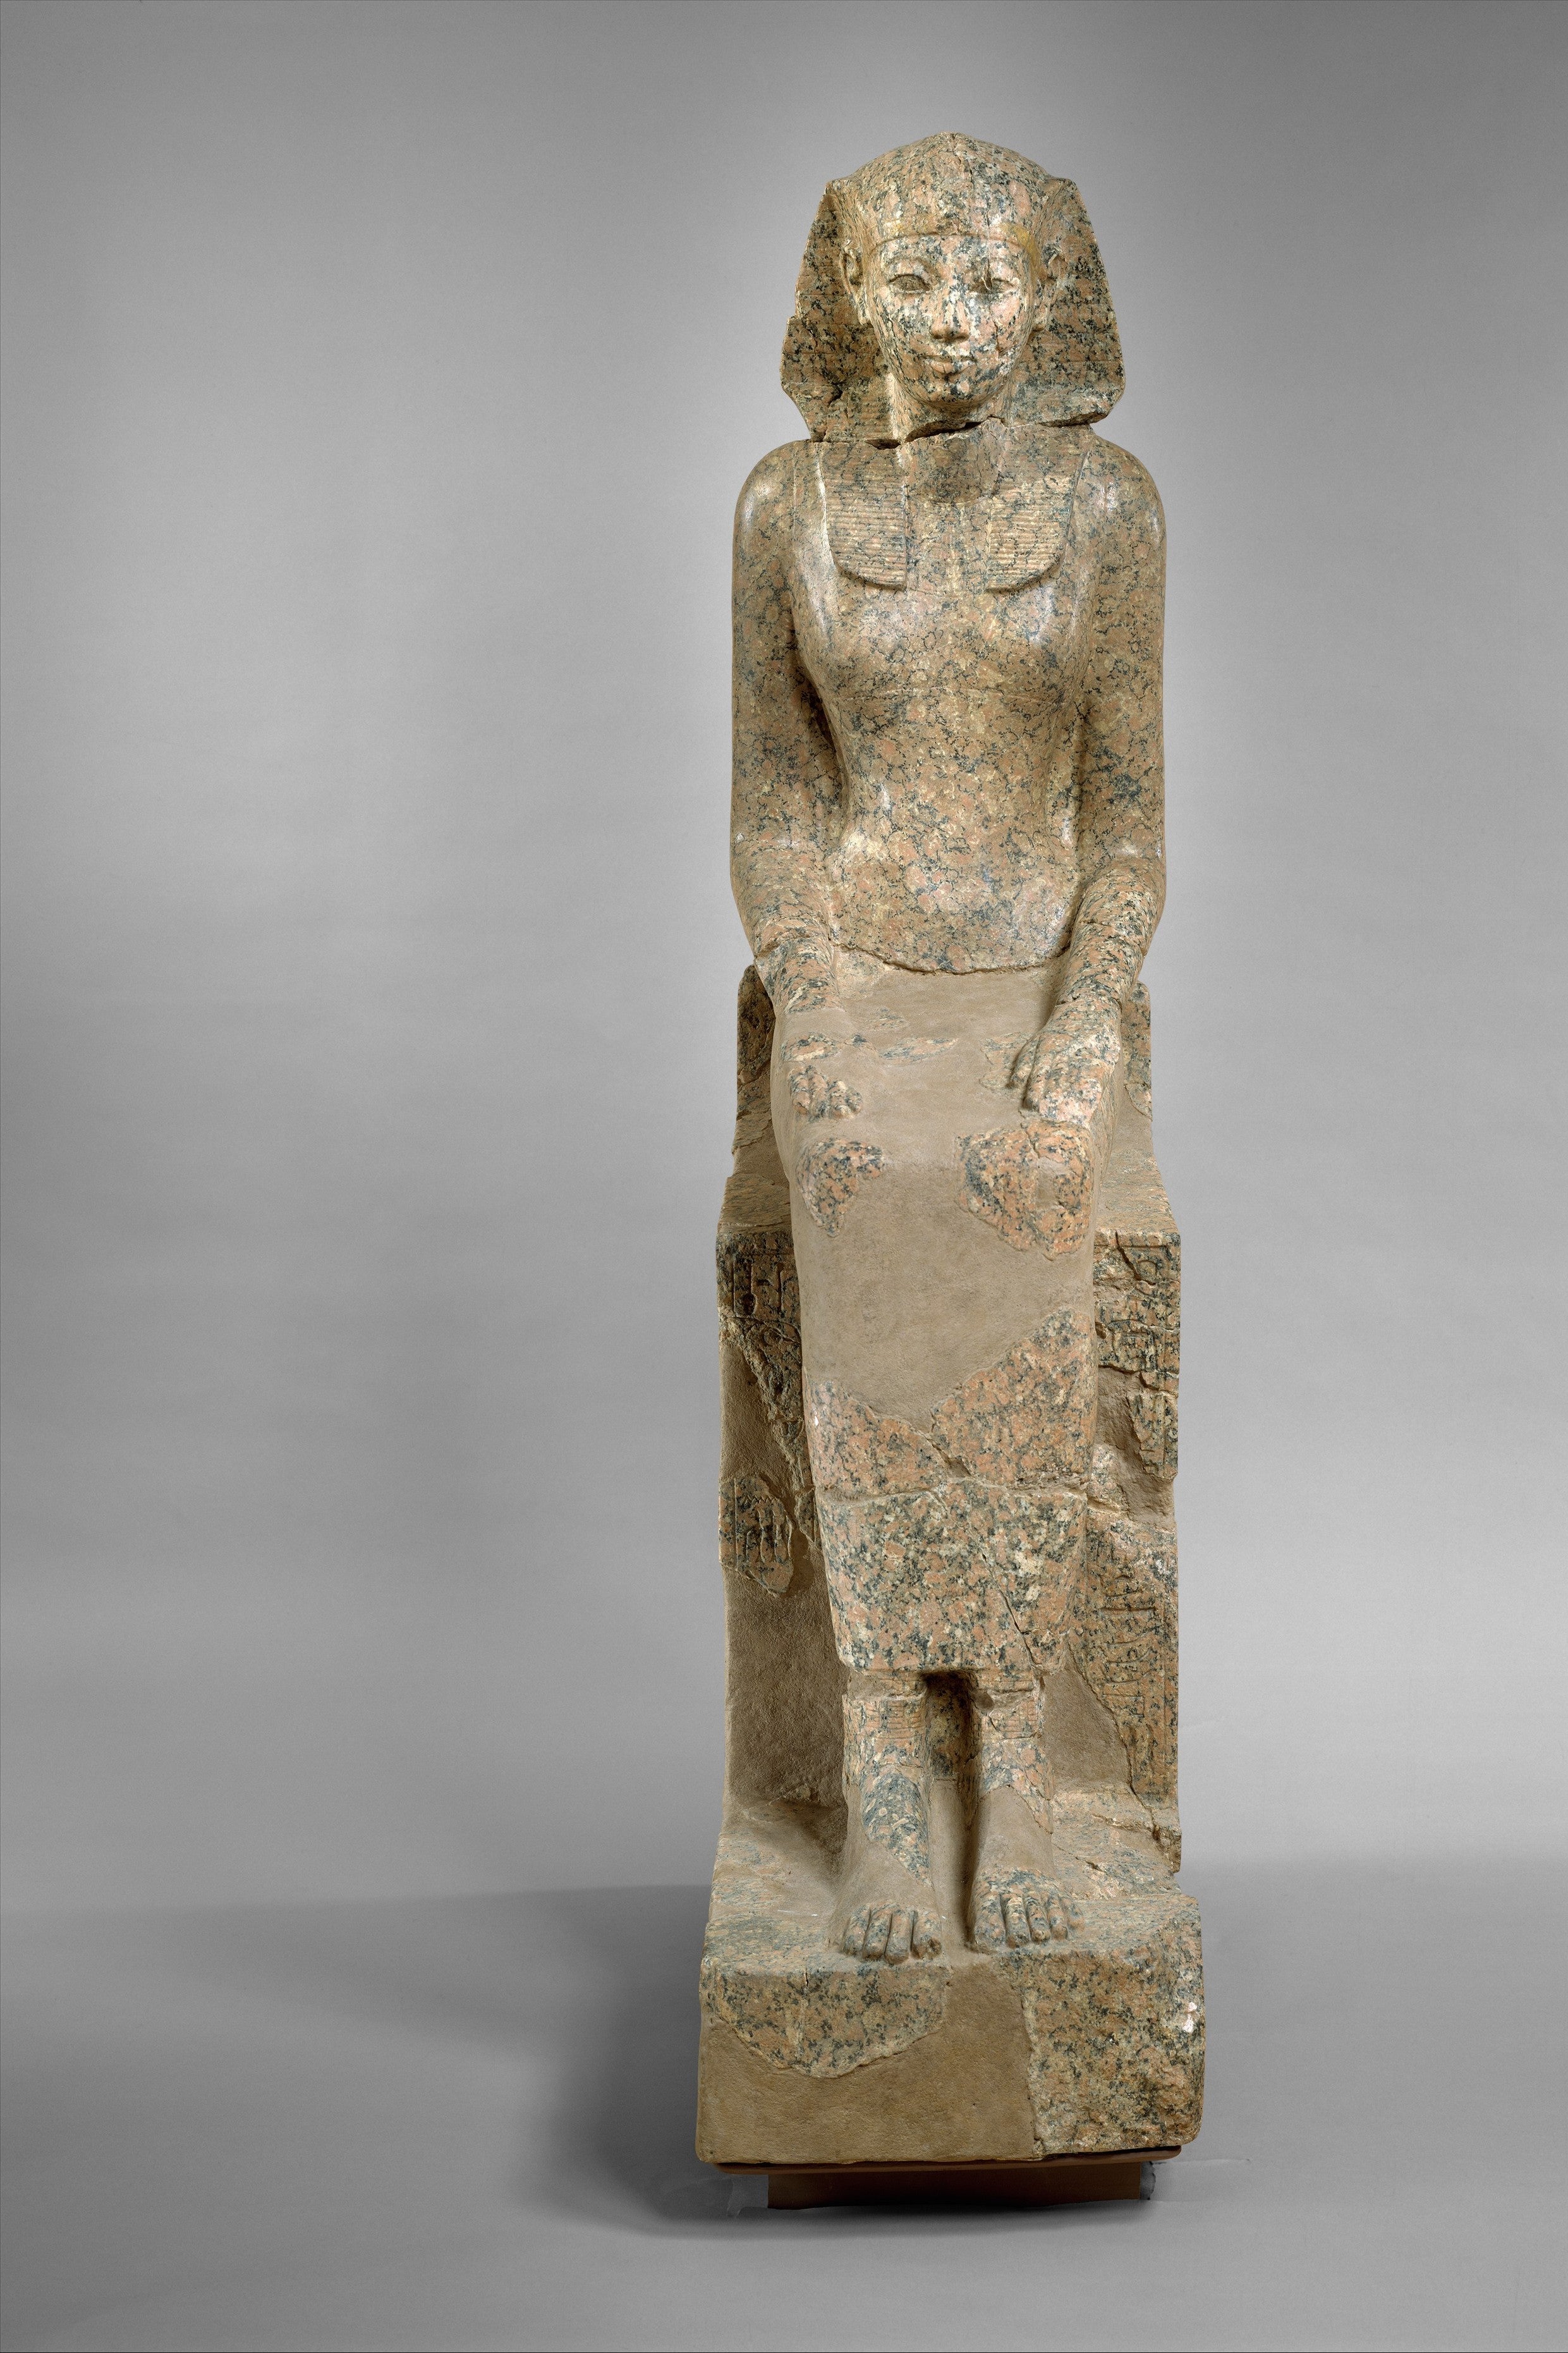 Statue of a standing woman with a pharaoh's headscarf.